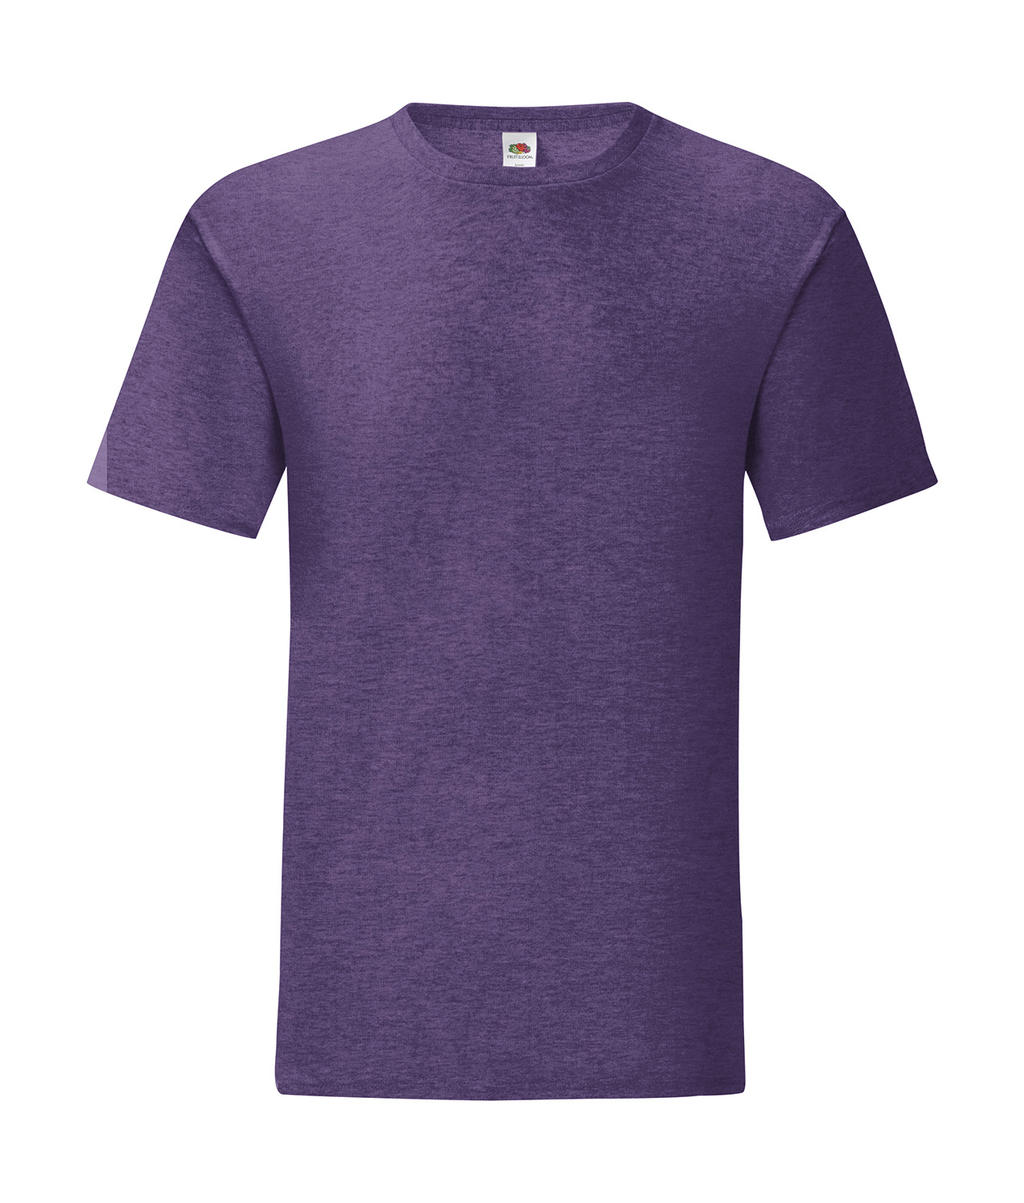  Iconic 150 T in Farbe Heather Purple